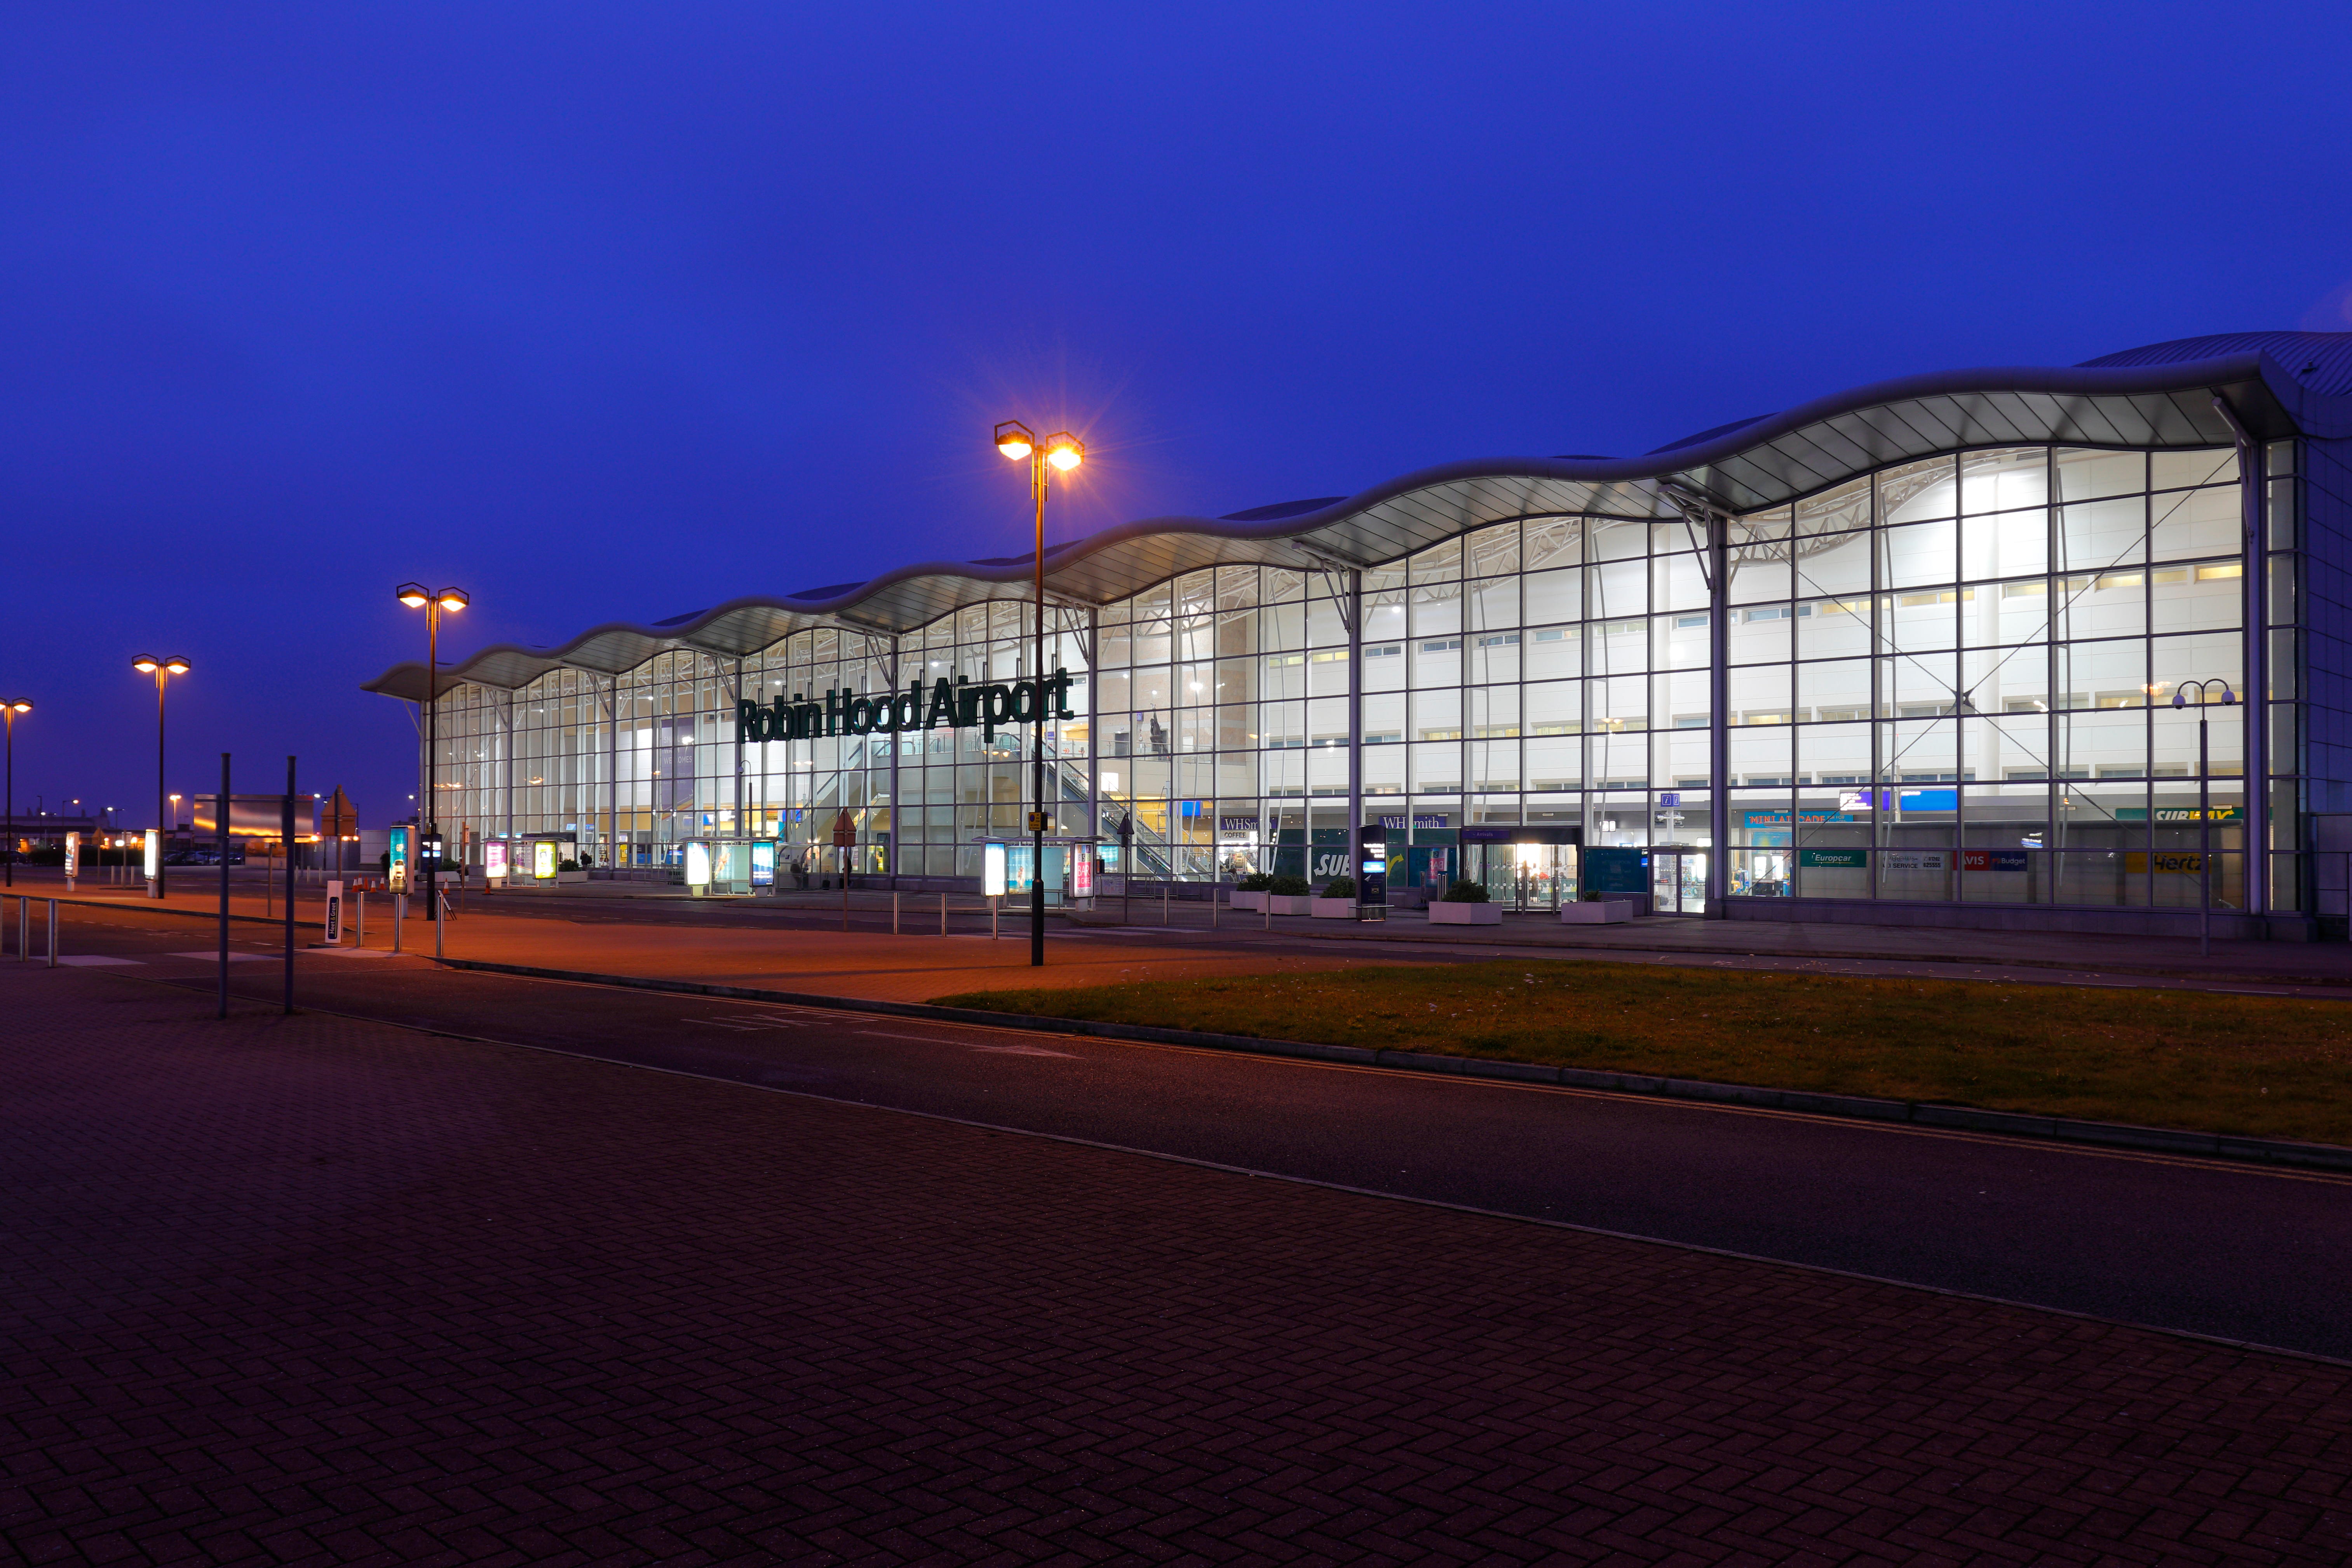 The airport was once voted the best in the UK by Which?